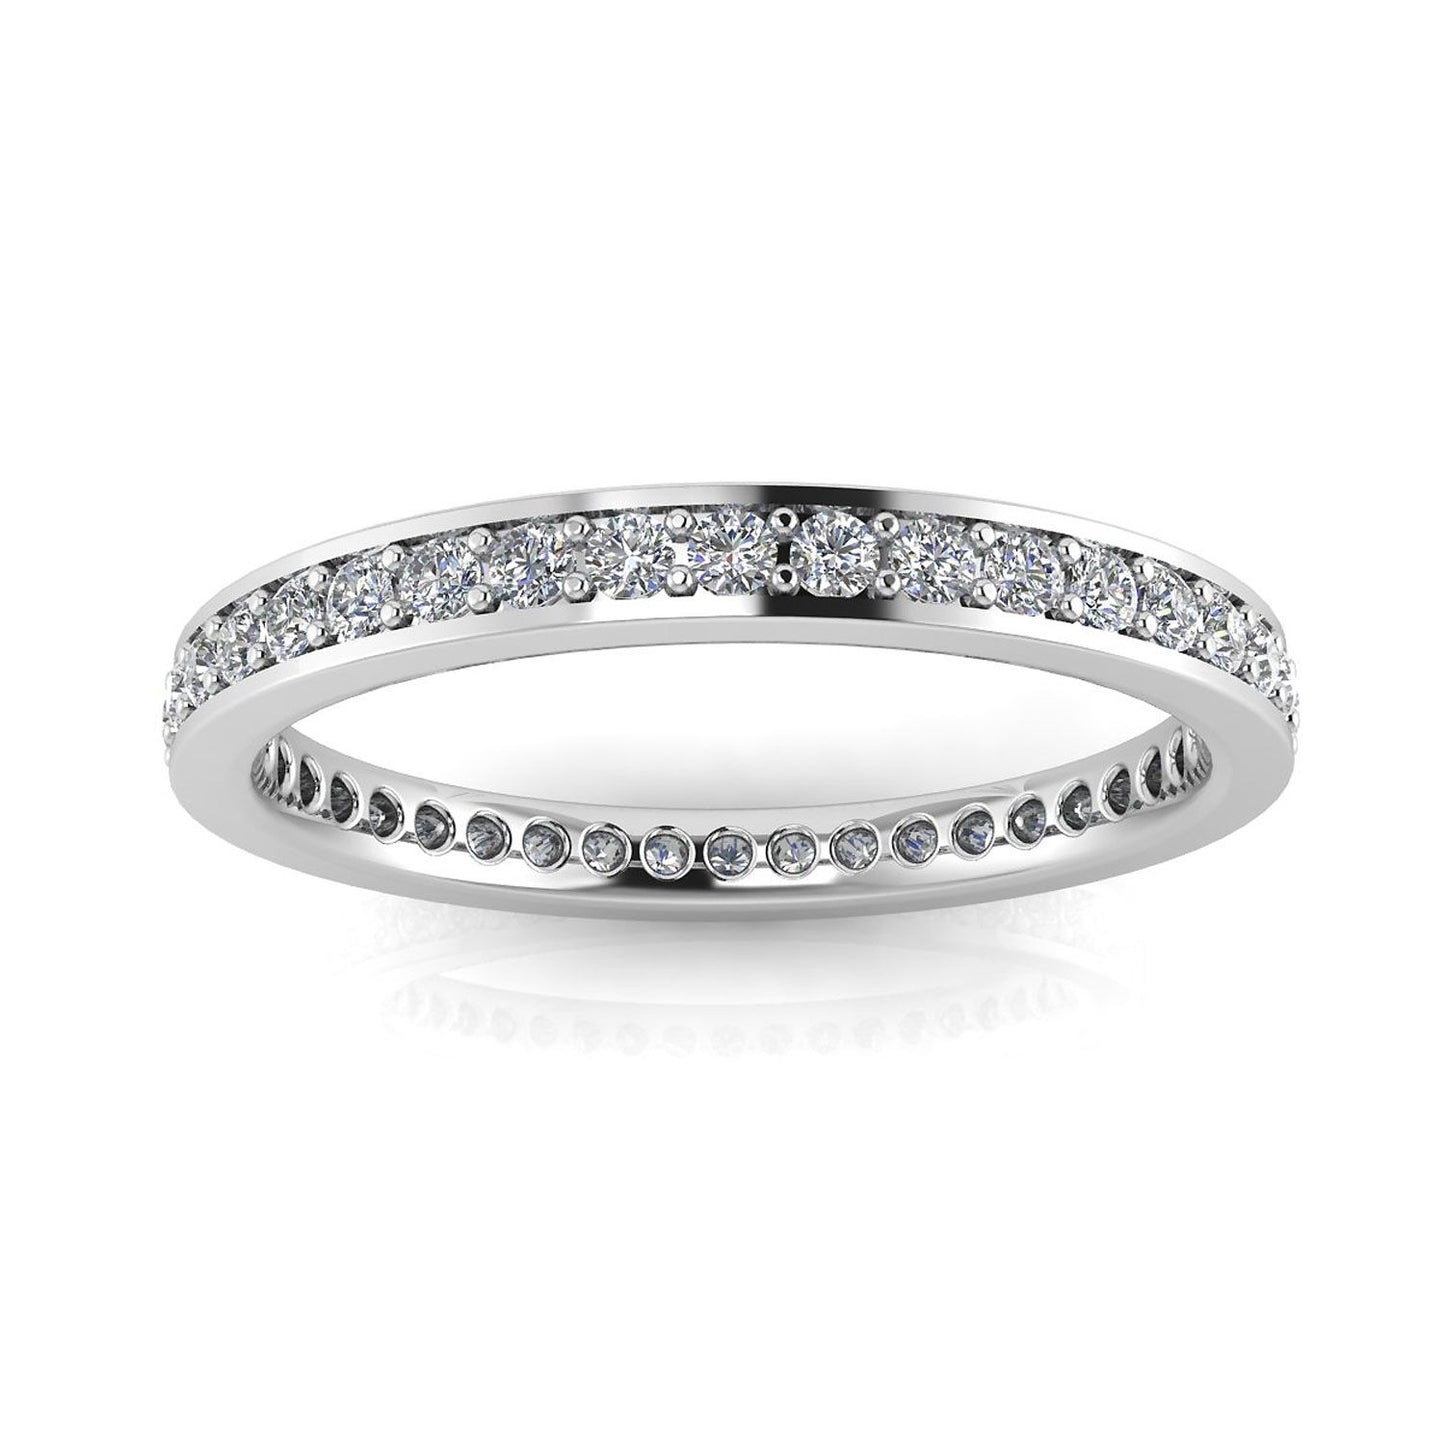 Round Brilliant Cut Diamond Channel Pave Set Eternity Ring In 14k White Gold  (0.68ct. Tw.) Ring Size 6